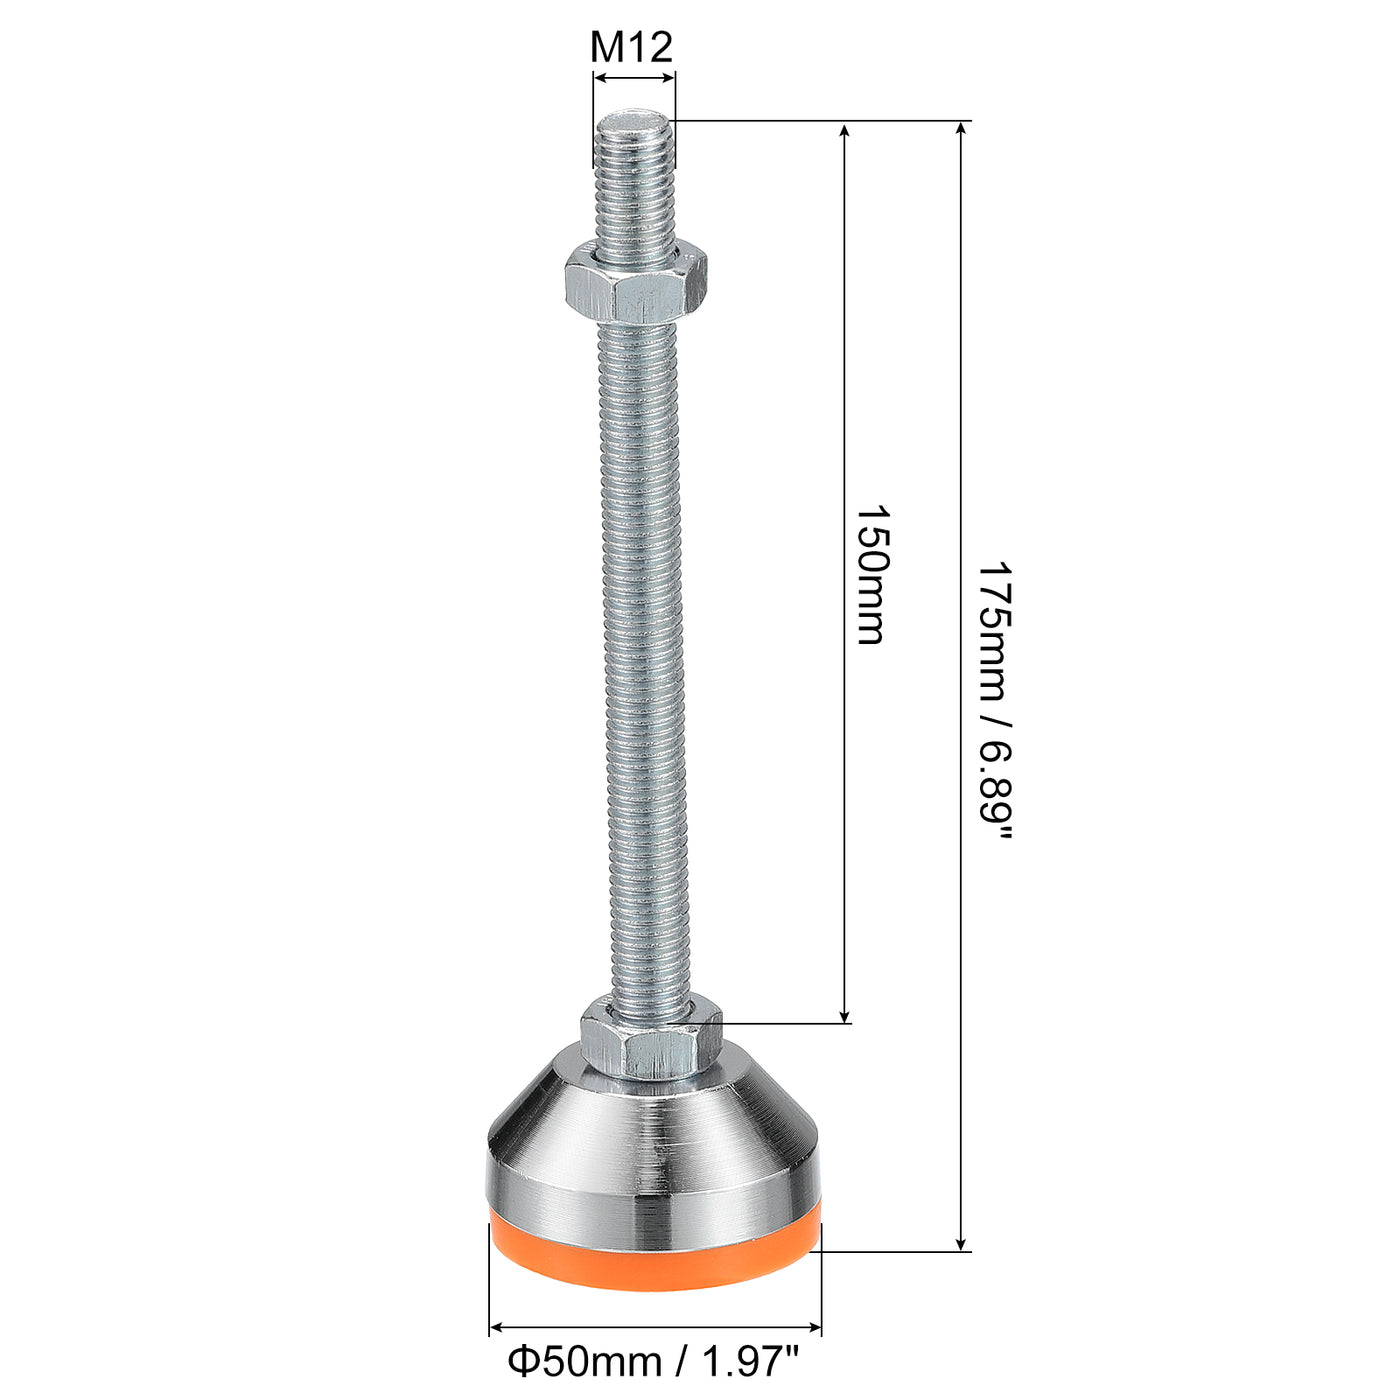 uxcell Uxcell Leveling Feet, 2Pcs M12x150x50mm - Carbon Steel Non-Skid Anti-shock Adjustable Table Feet, Leveling Screw Leg for Furniture Workshops Equipment